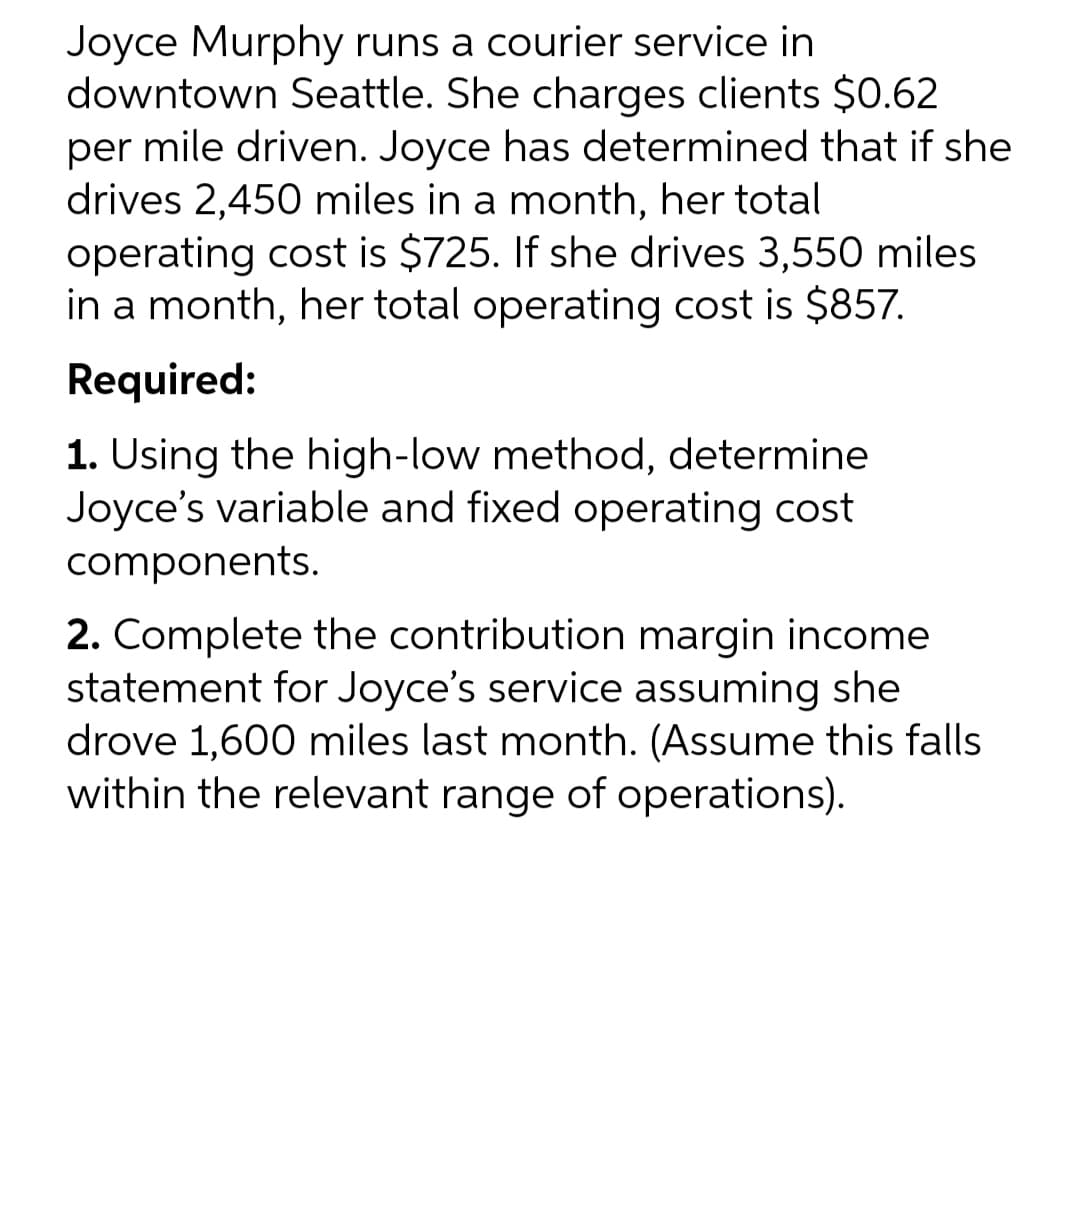 Joyce Murphy runs a courier service in
downtown Seattle. She charges clients $0.62
per mile driven. Joyce has determined that if she
drives 2,450 miles in a month, her total
operating cost is $725. If she drives 3,550 miles
in a month, her total operating cost is $857.
Required:
1. Using the high-low method, determine
Joyce's variable and fixed operating cost
components.
2. Complete the contribution margin income
statement for Joyce's service assuming she
drove 1,600 miles last month. (Assume this falls
within the relevant range of operations).